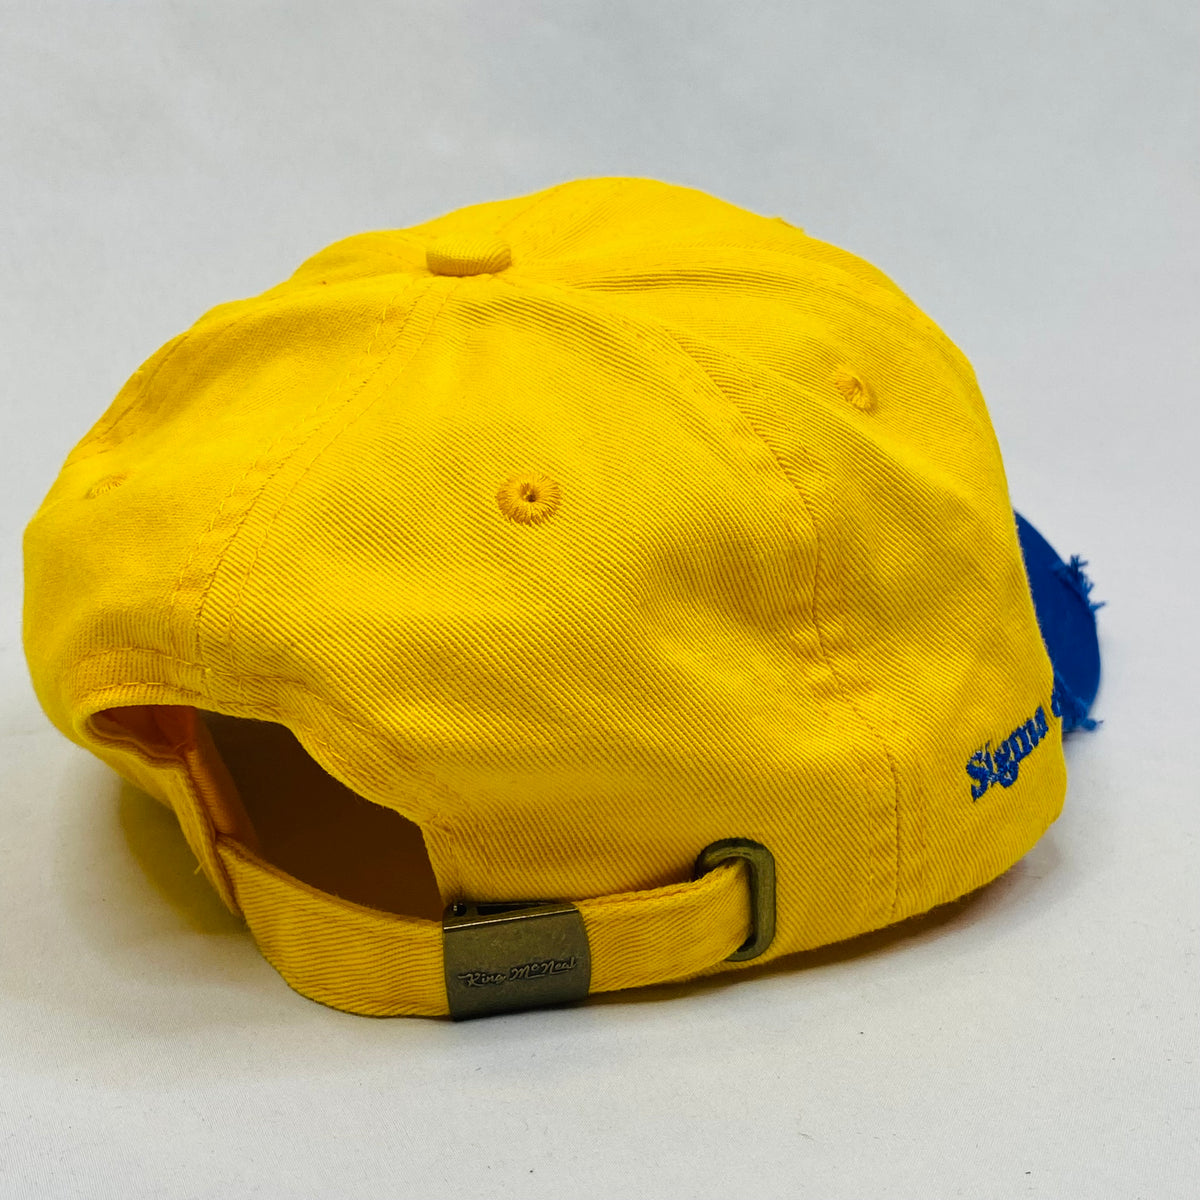 “Poodle” SGRho Yellow Gold & Royal Blue Hat – The King McNeal Collection